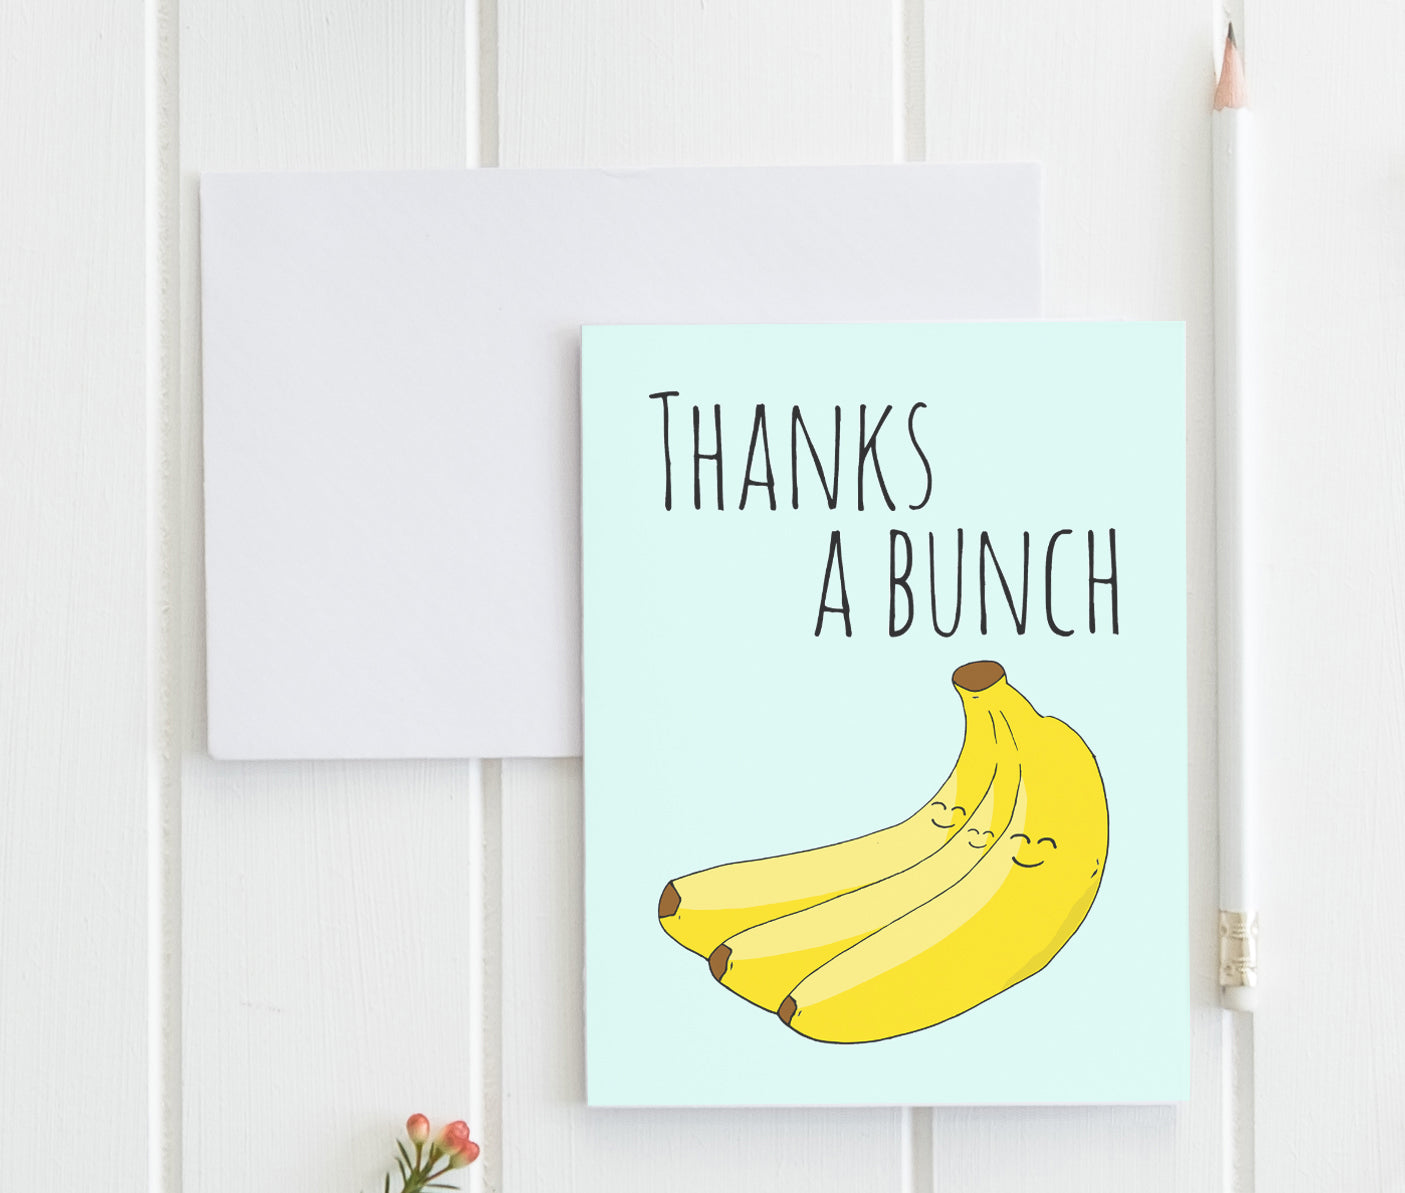 a card with a bunch of bananas on it